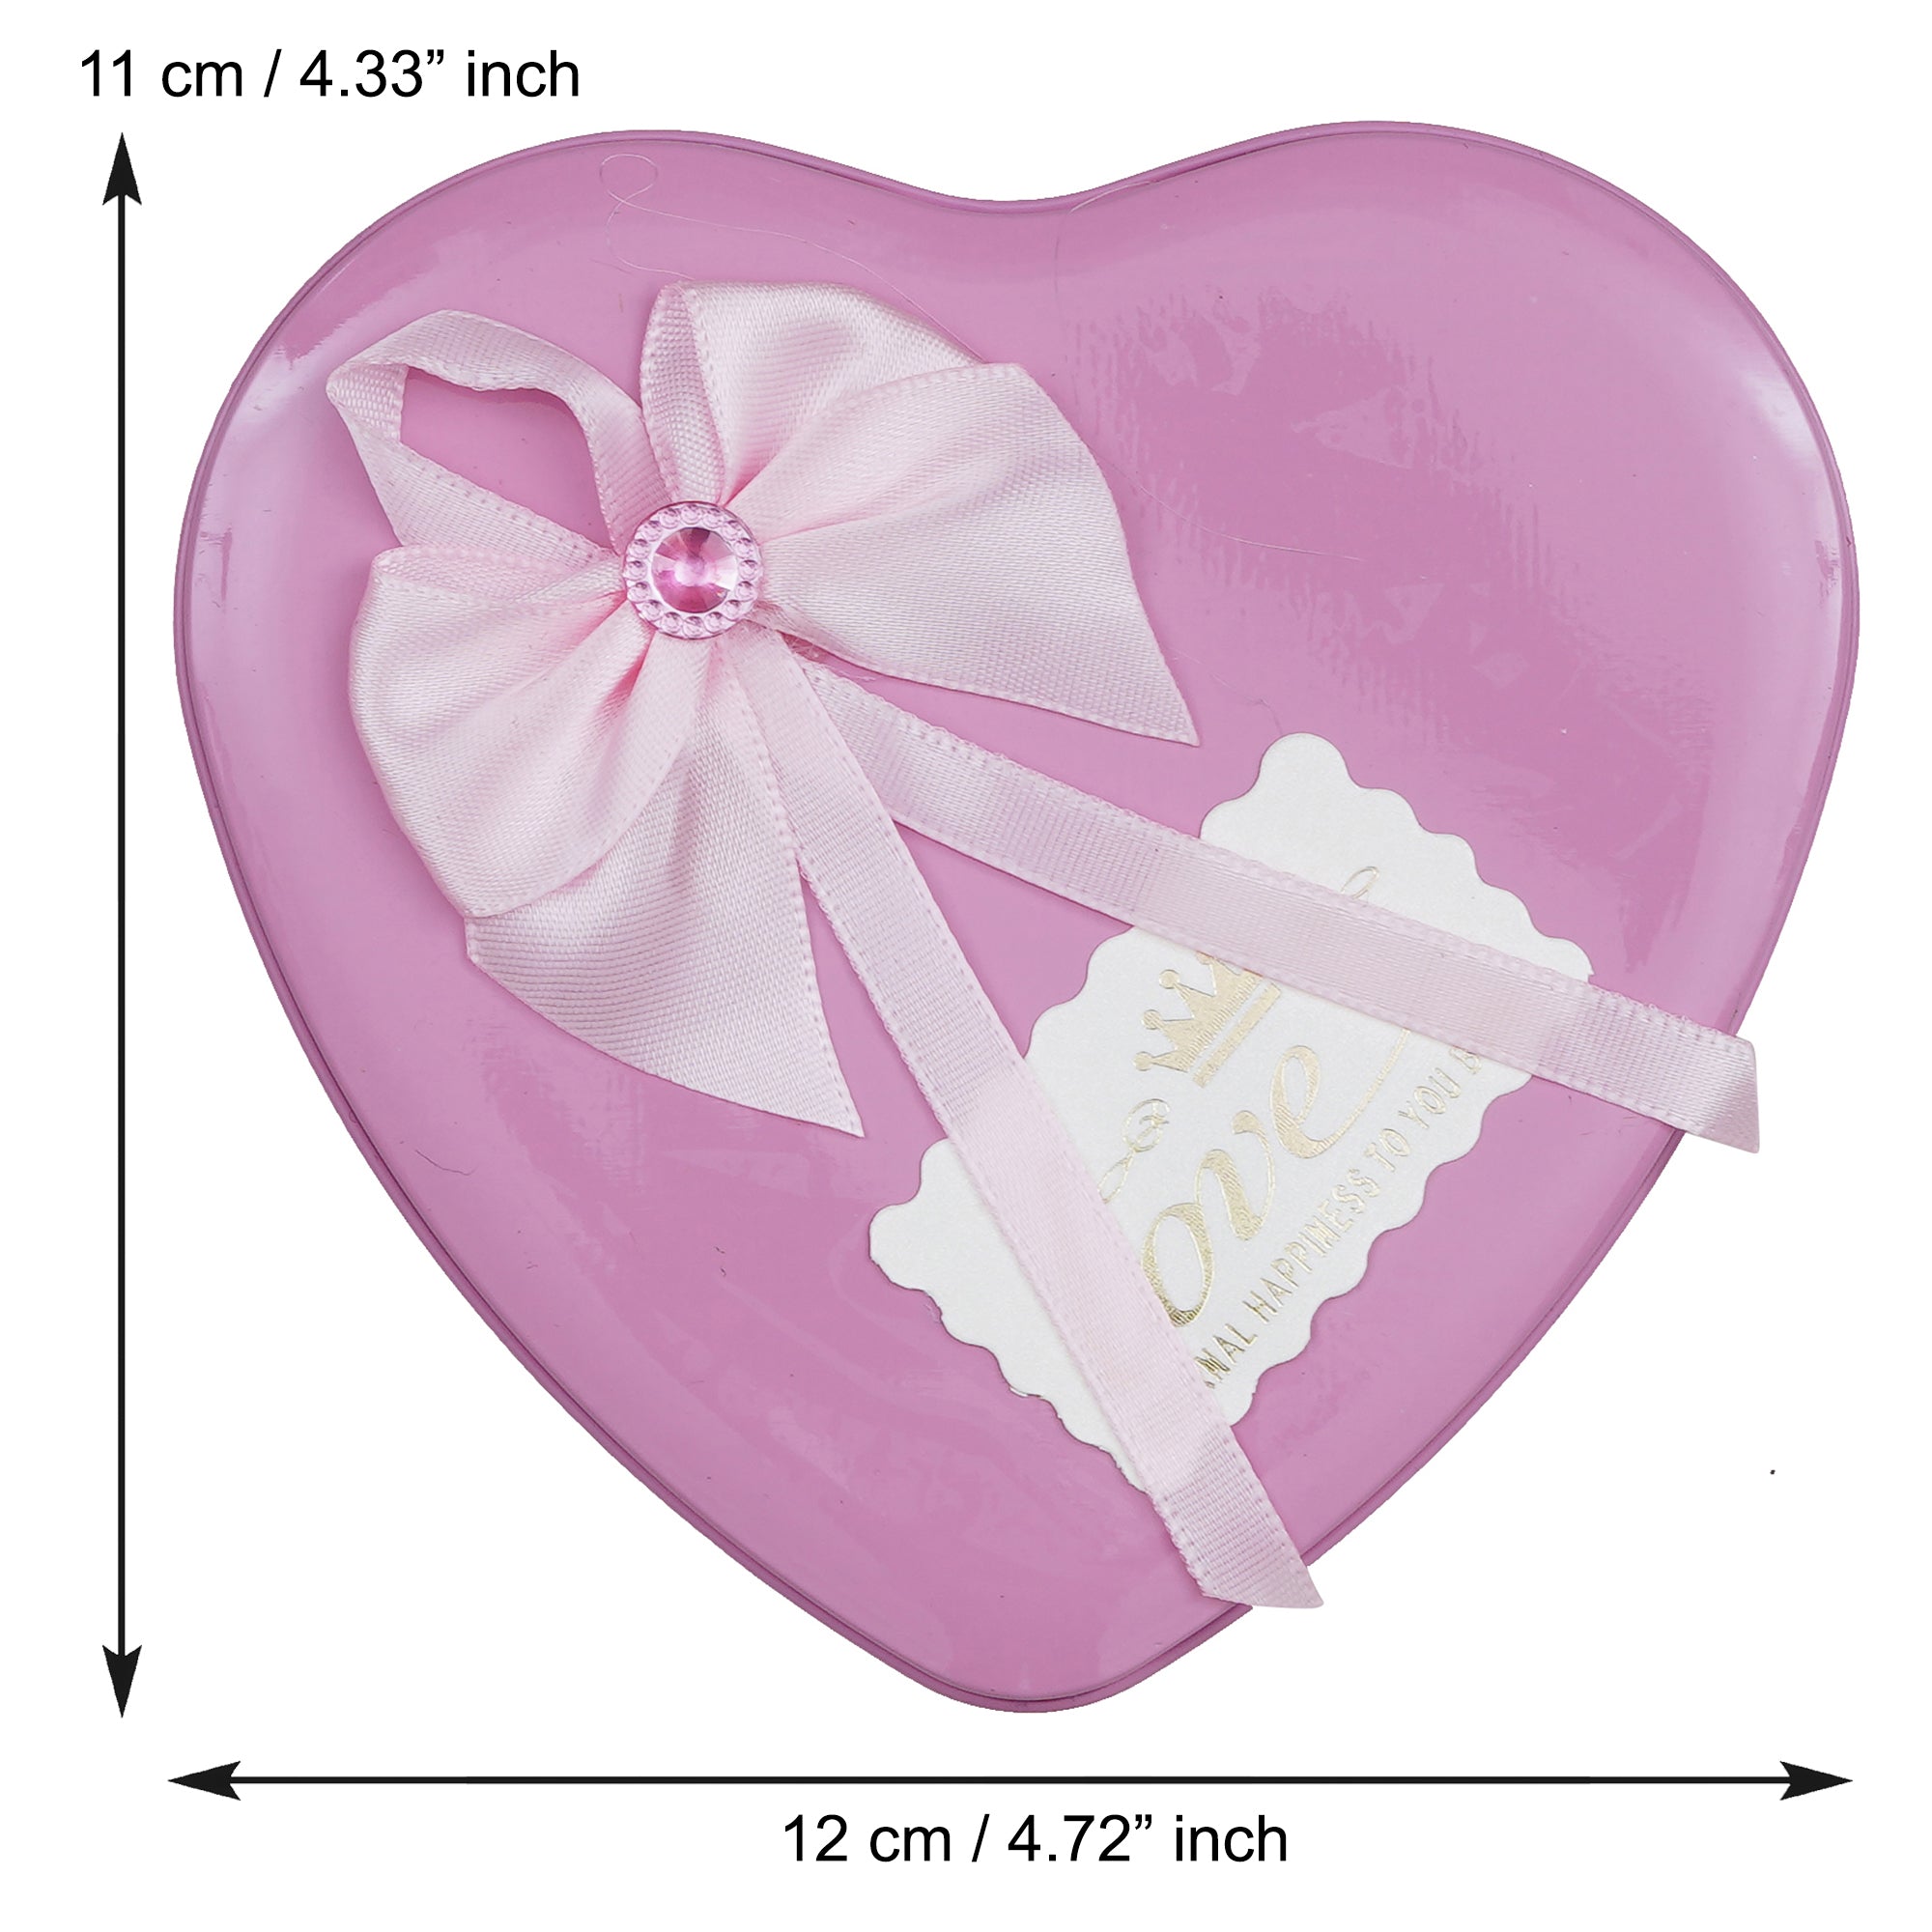 Valentine Combo of Golden Rose Gift Set, "My Heart Beats Only For You" Wooden Showpiece With Stand, Pink Heart Shaped Gift Box with Teddy and Roses 6